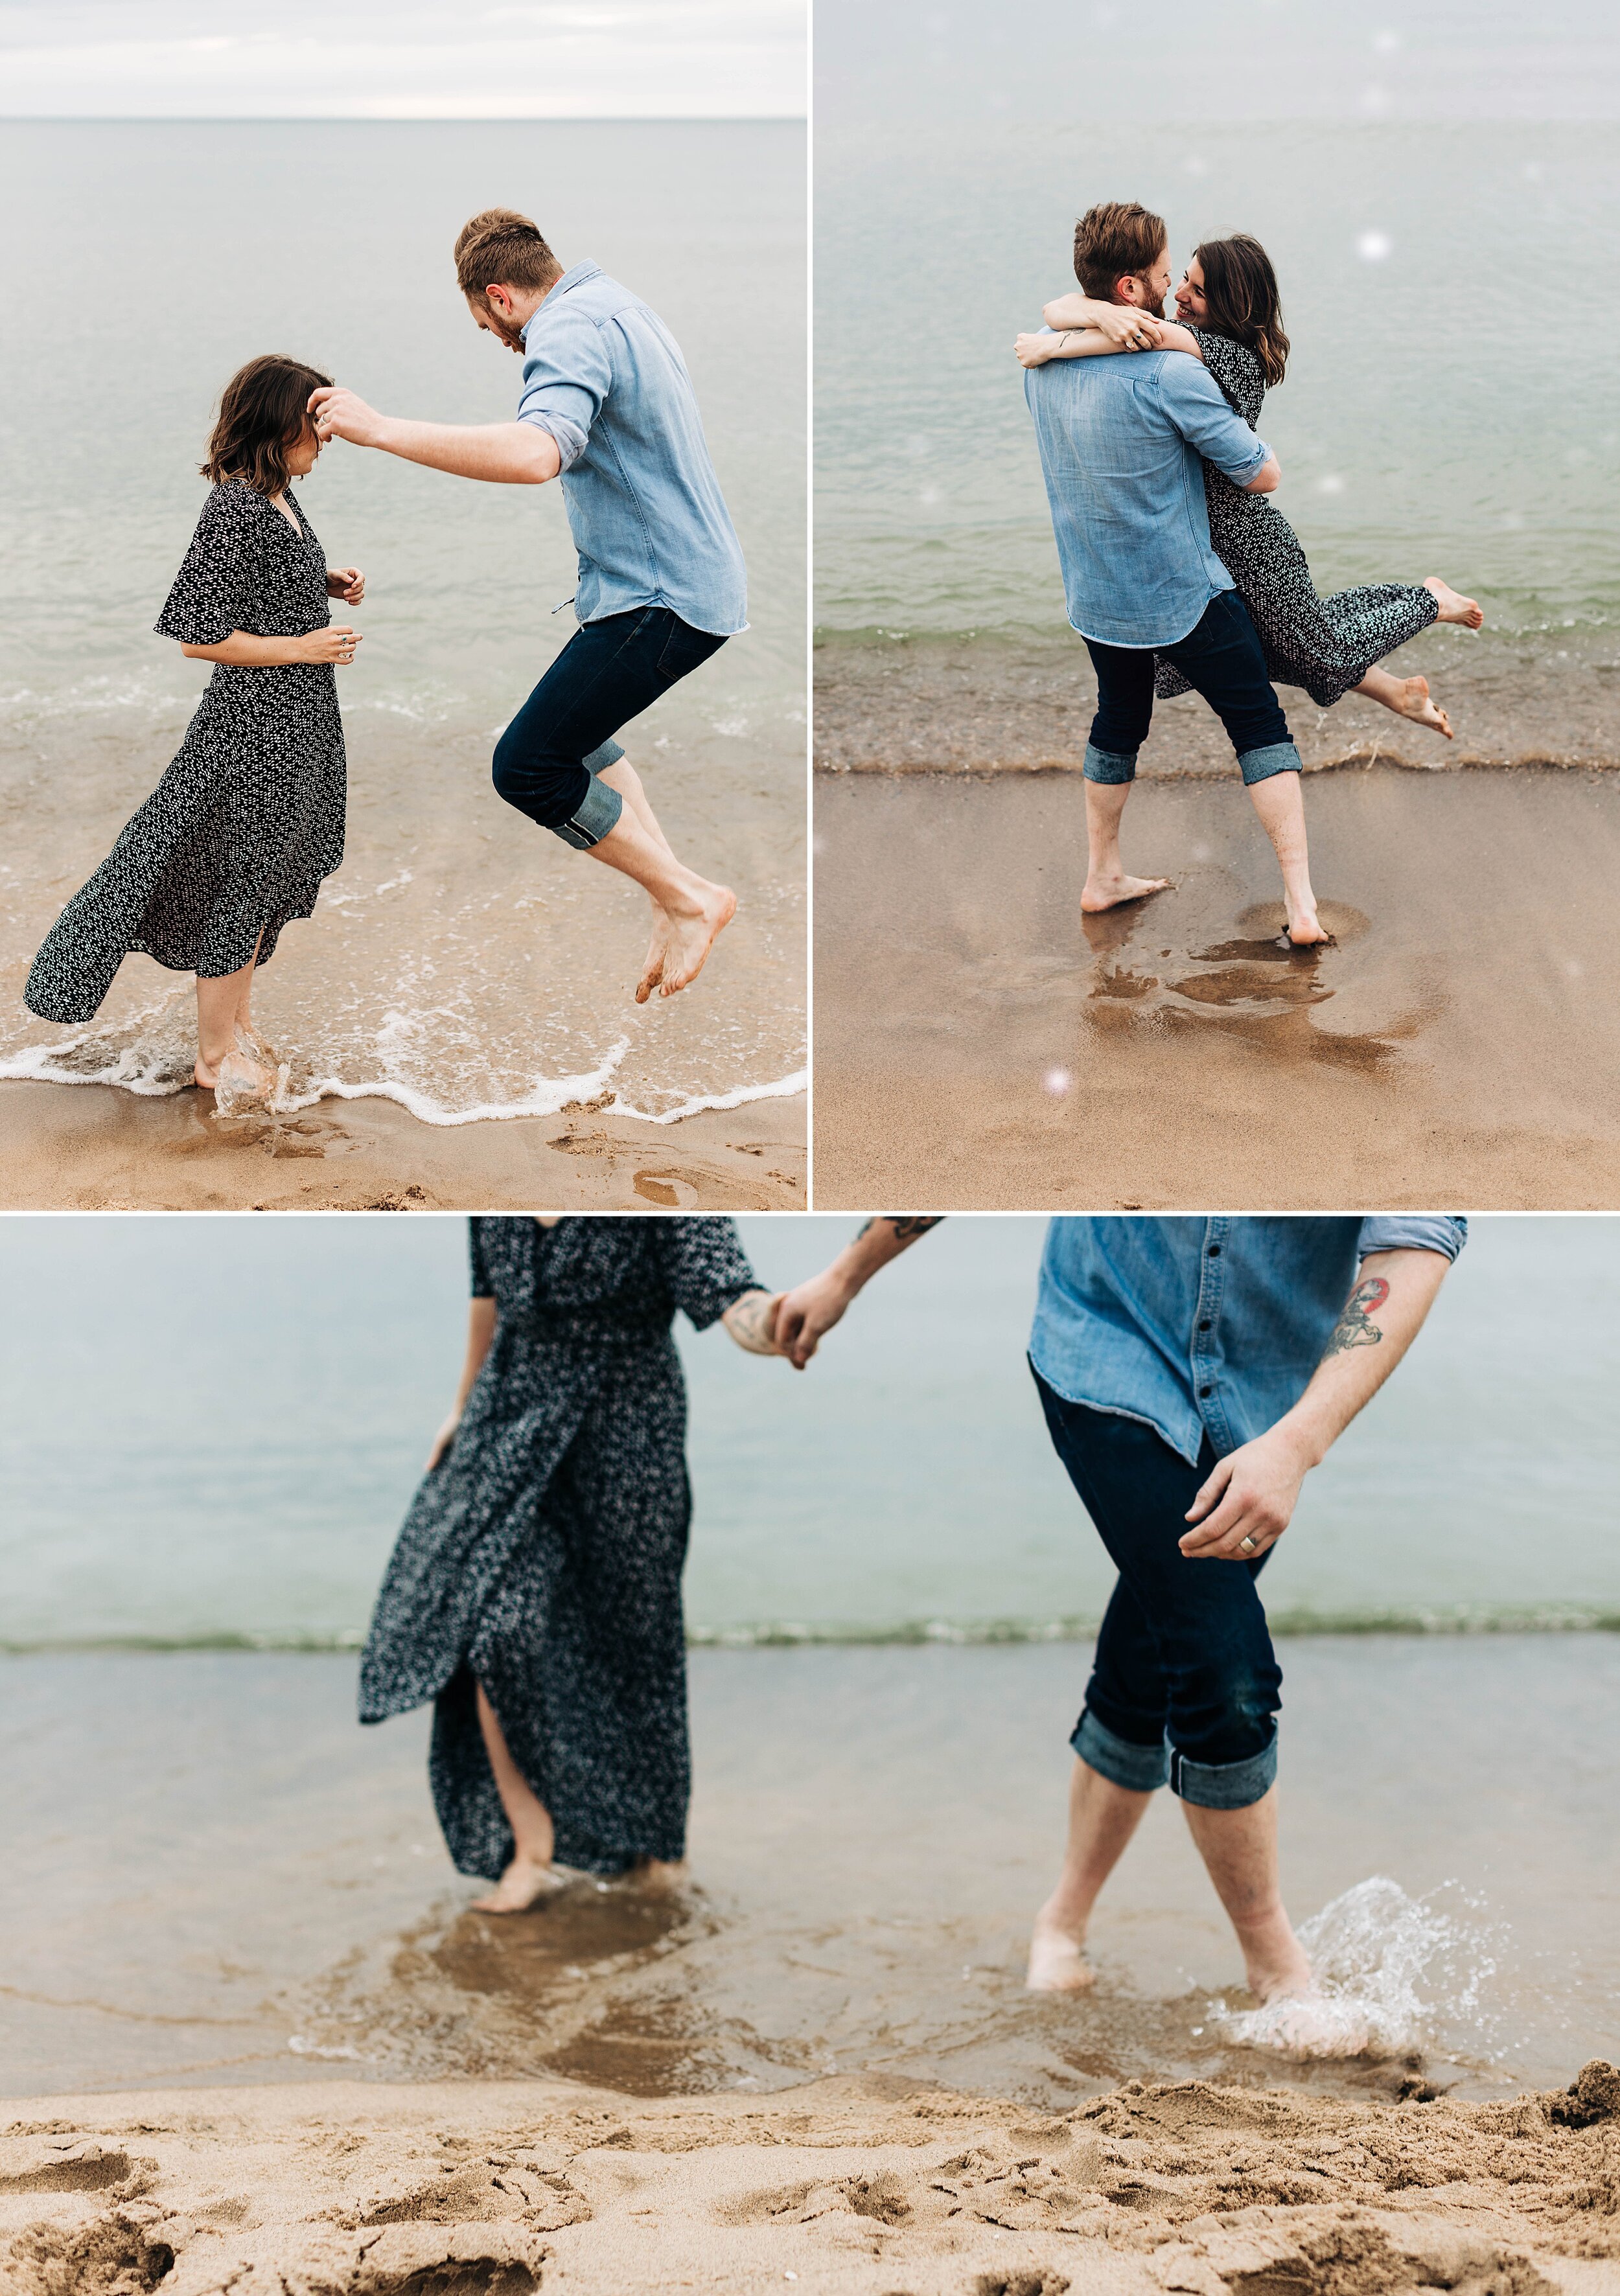 30+ Best Beach Family Photo Ideas: Tips for Getting the Best Pictures